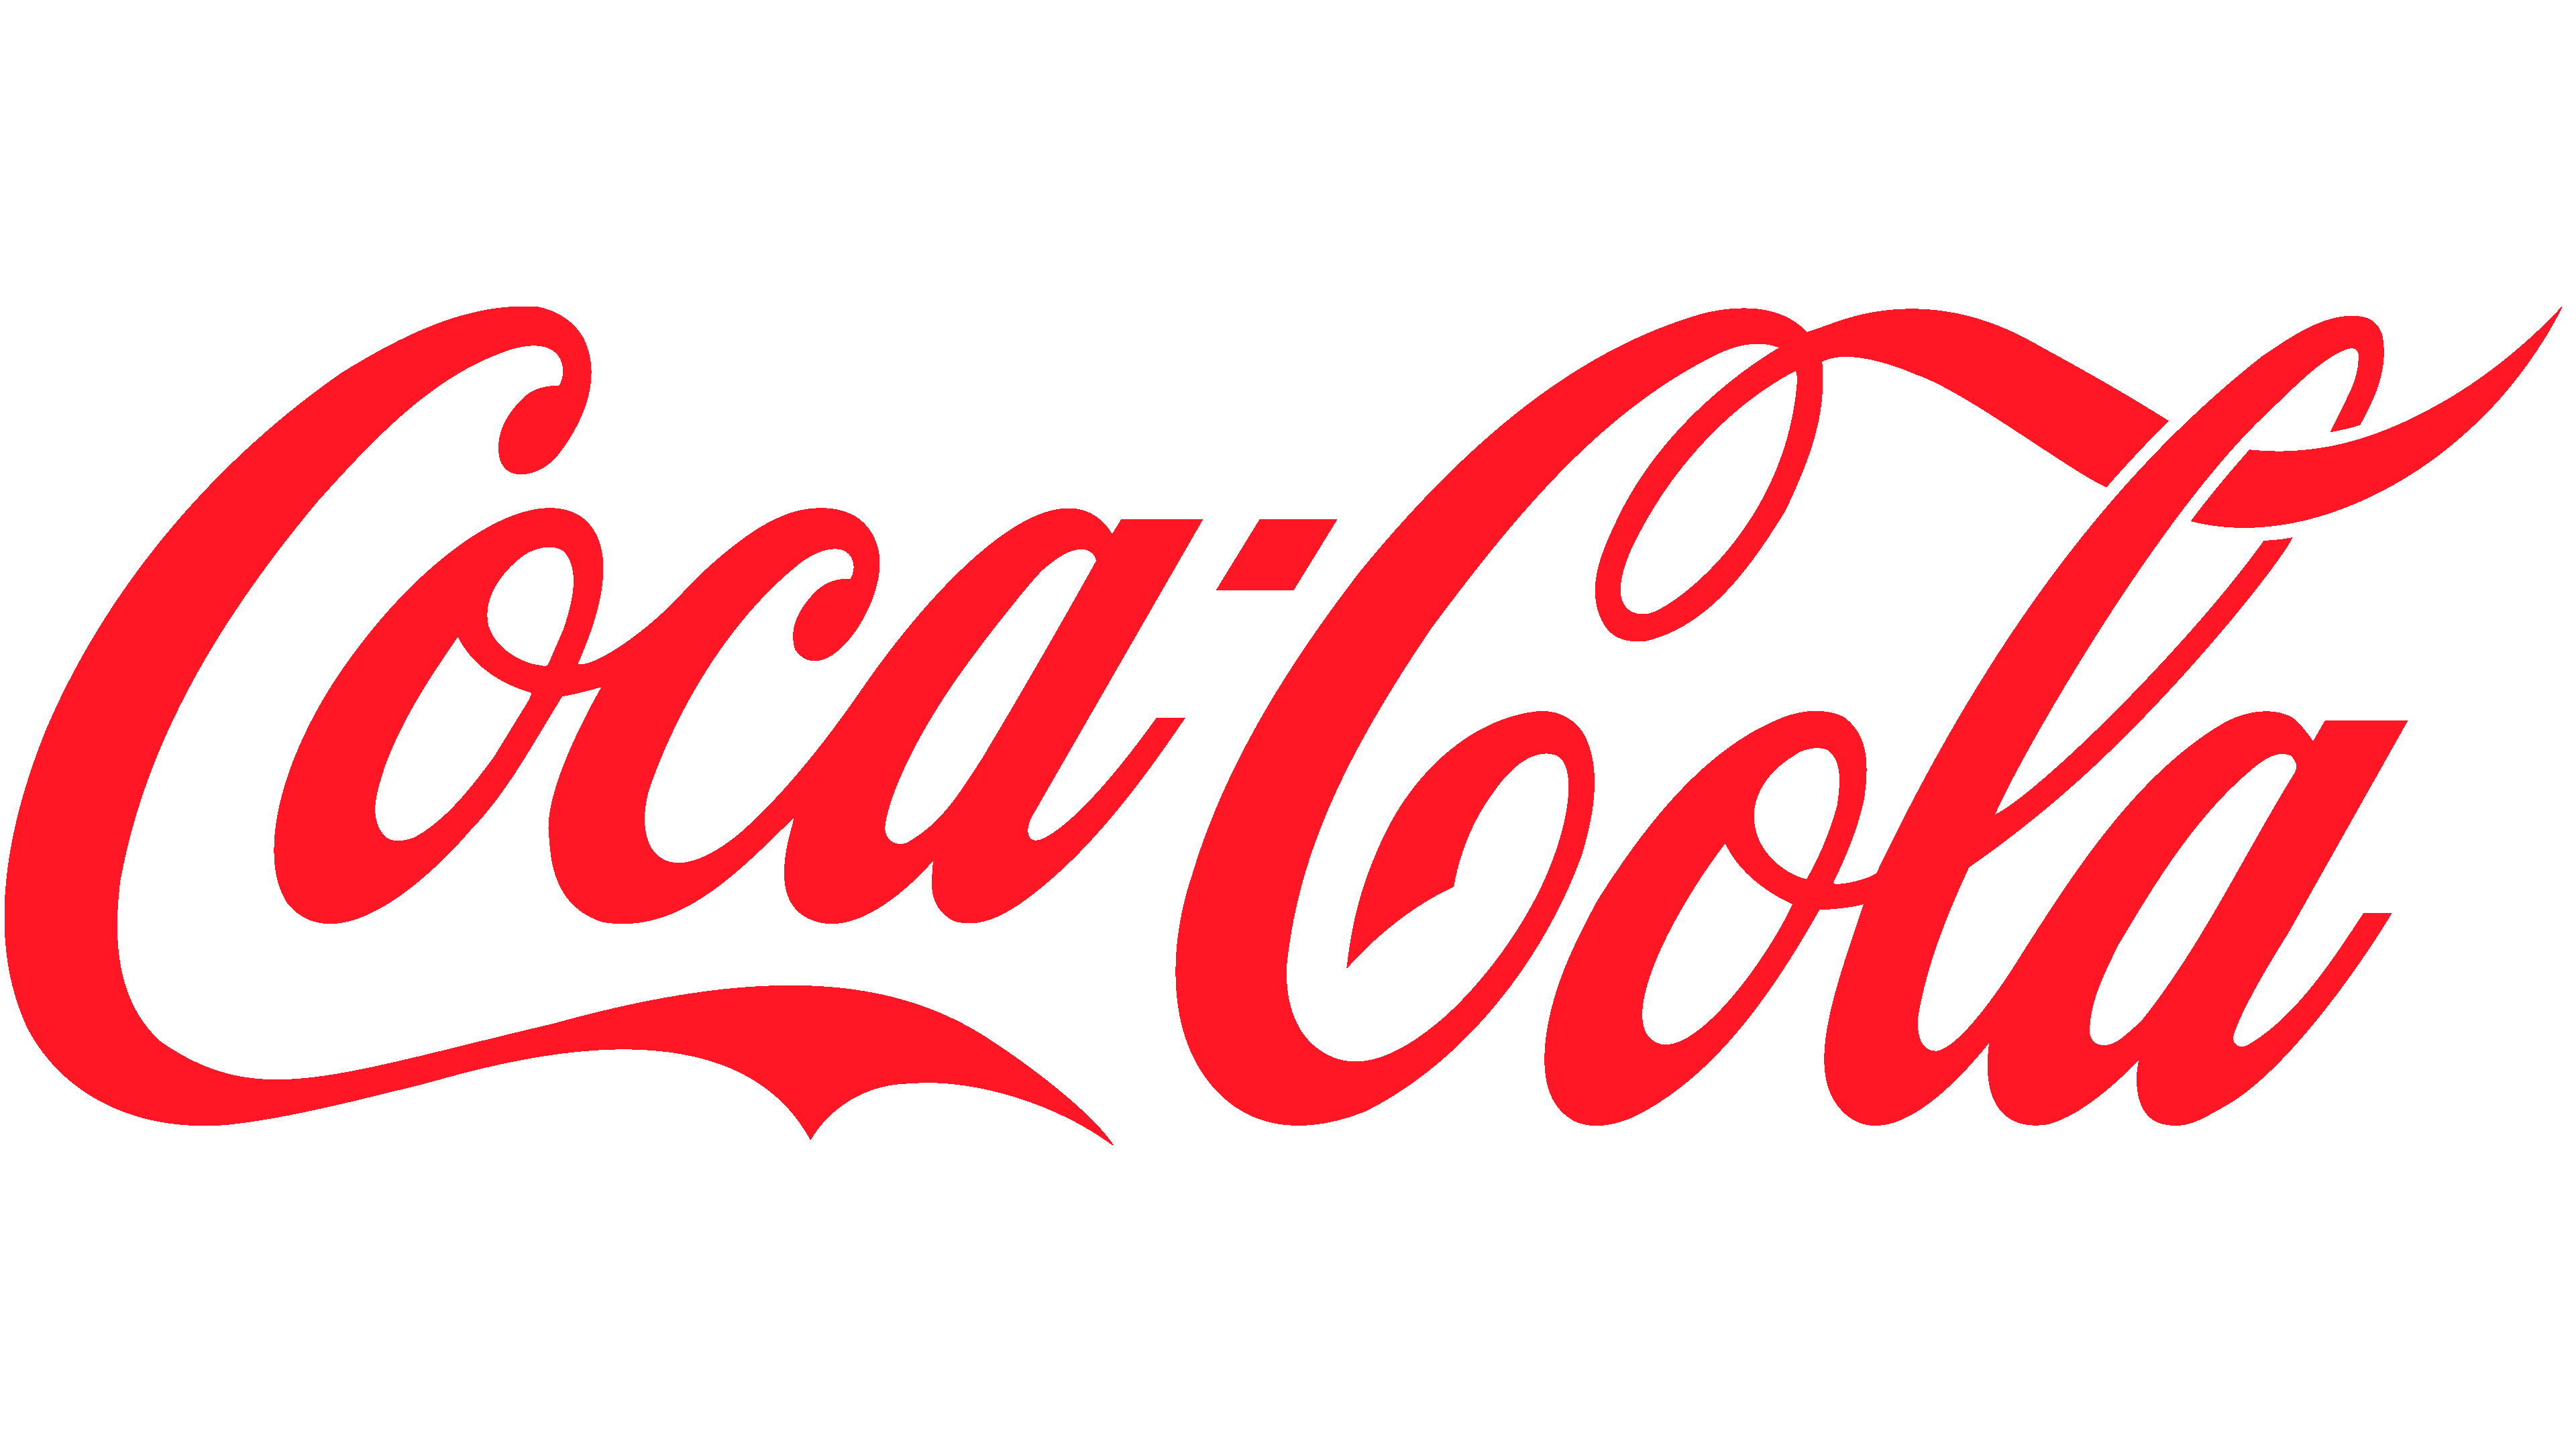 Coca Cola Logo | Coca Cola Products Sold at Four Star Supply